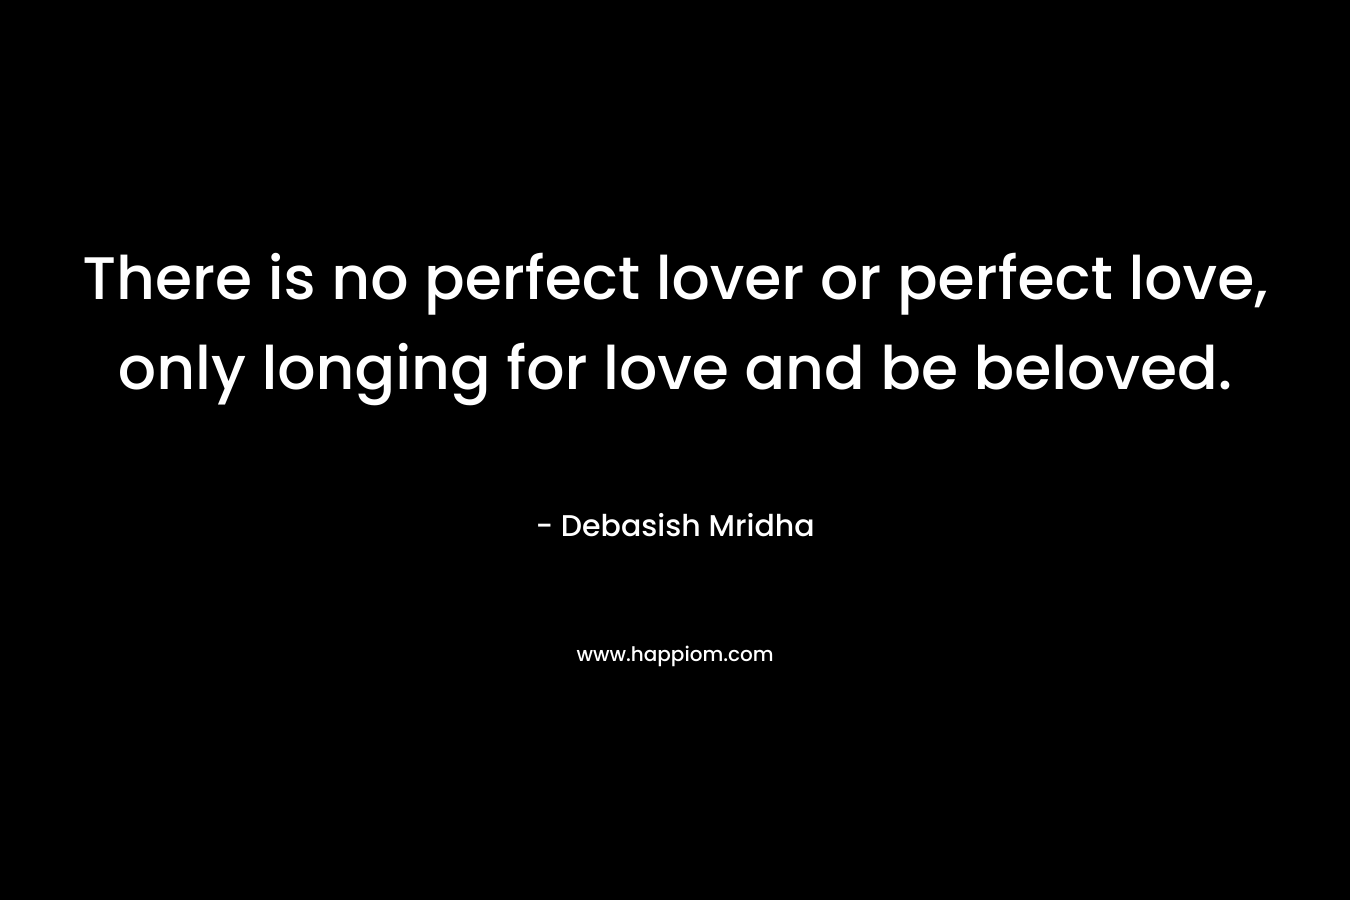 There is no perfect lover or perfect love, only longing for love and be beloved.